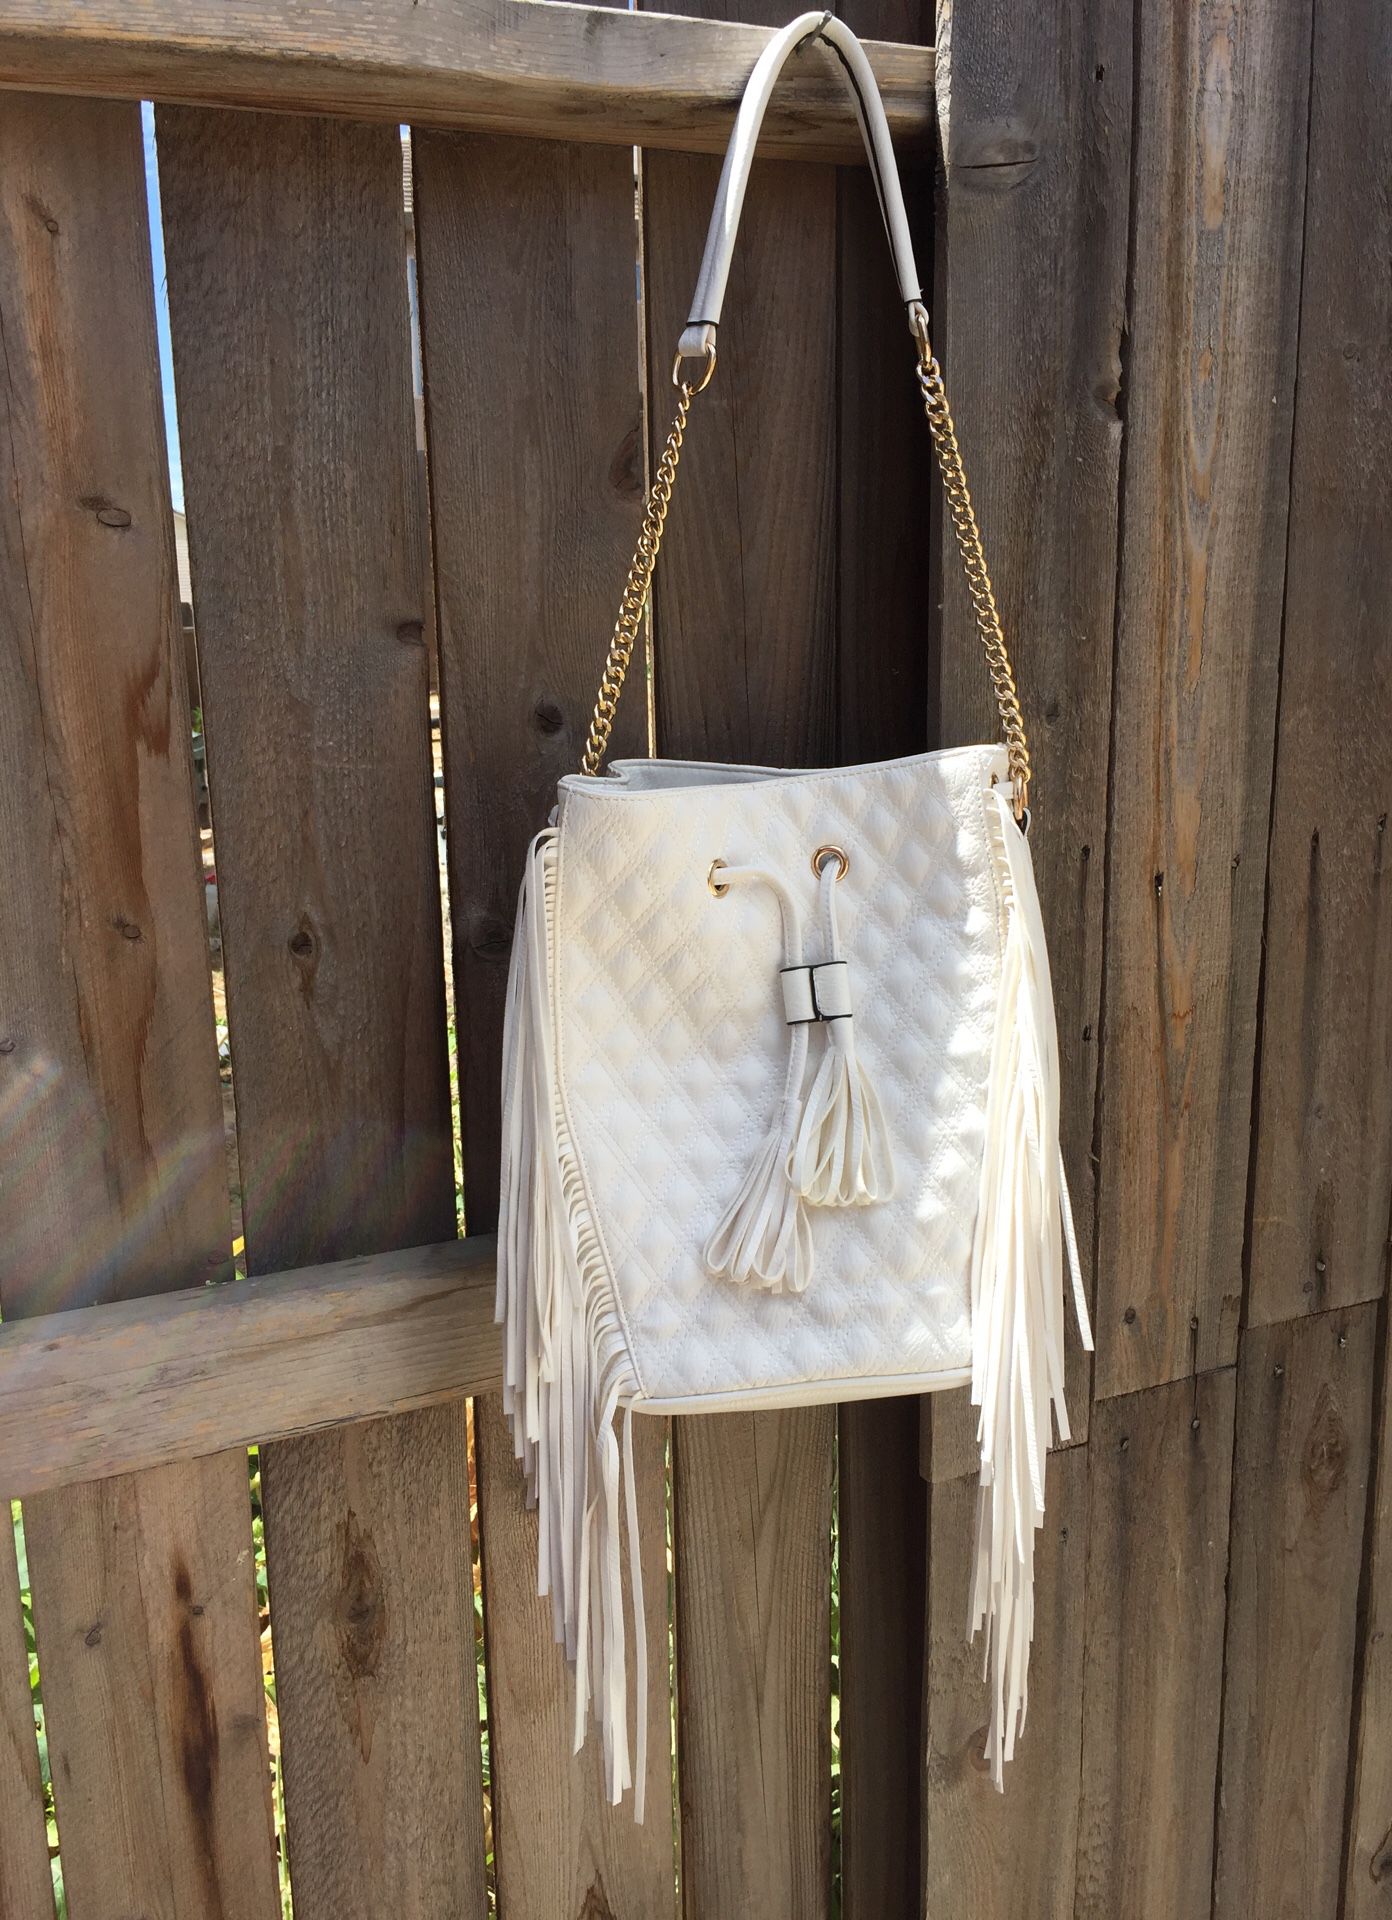 Brand new white & gold tote bag with heavy fringes